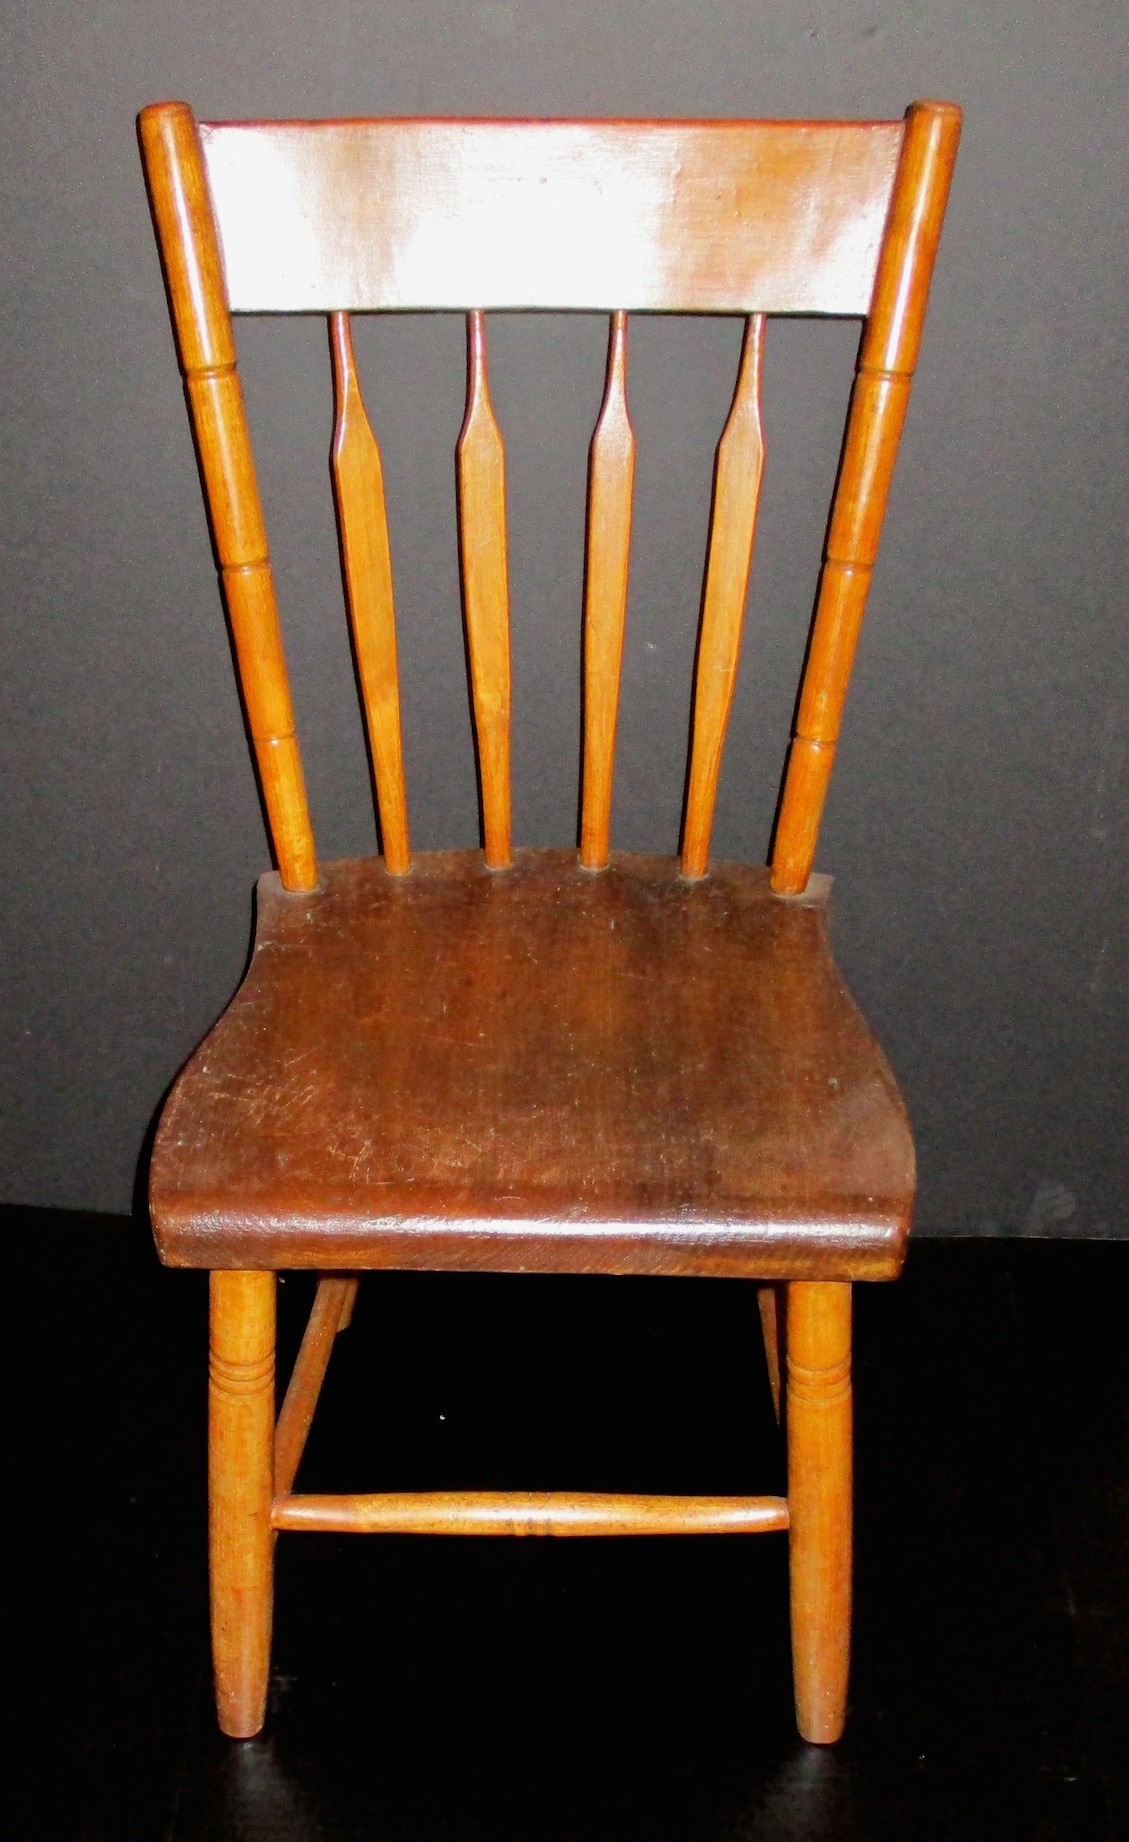 One of a Pair of 19th Century Arrow Back Chairs (Original Condition - We will restore to your specifications)